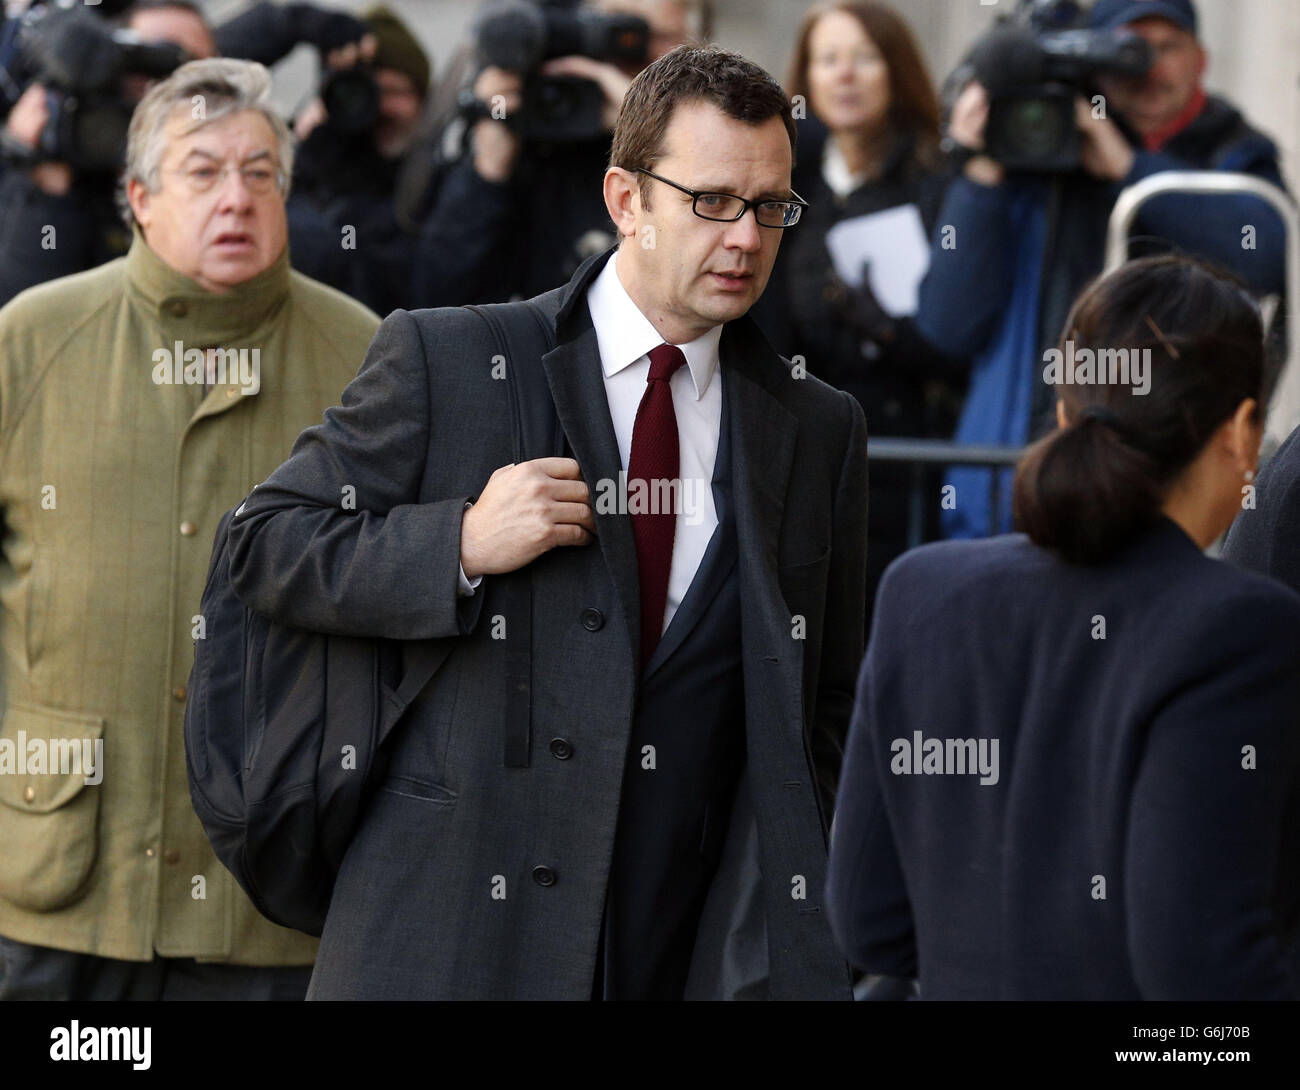 Former News of the World Editor Andy Coulson (centre) arrives at the Old Bailey as the phone hacking trial continues. Stock Photo